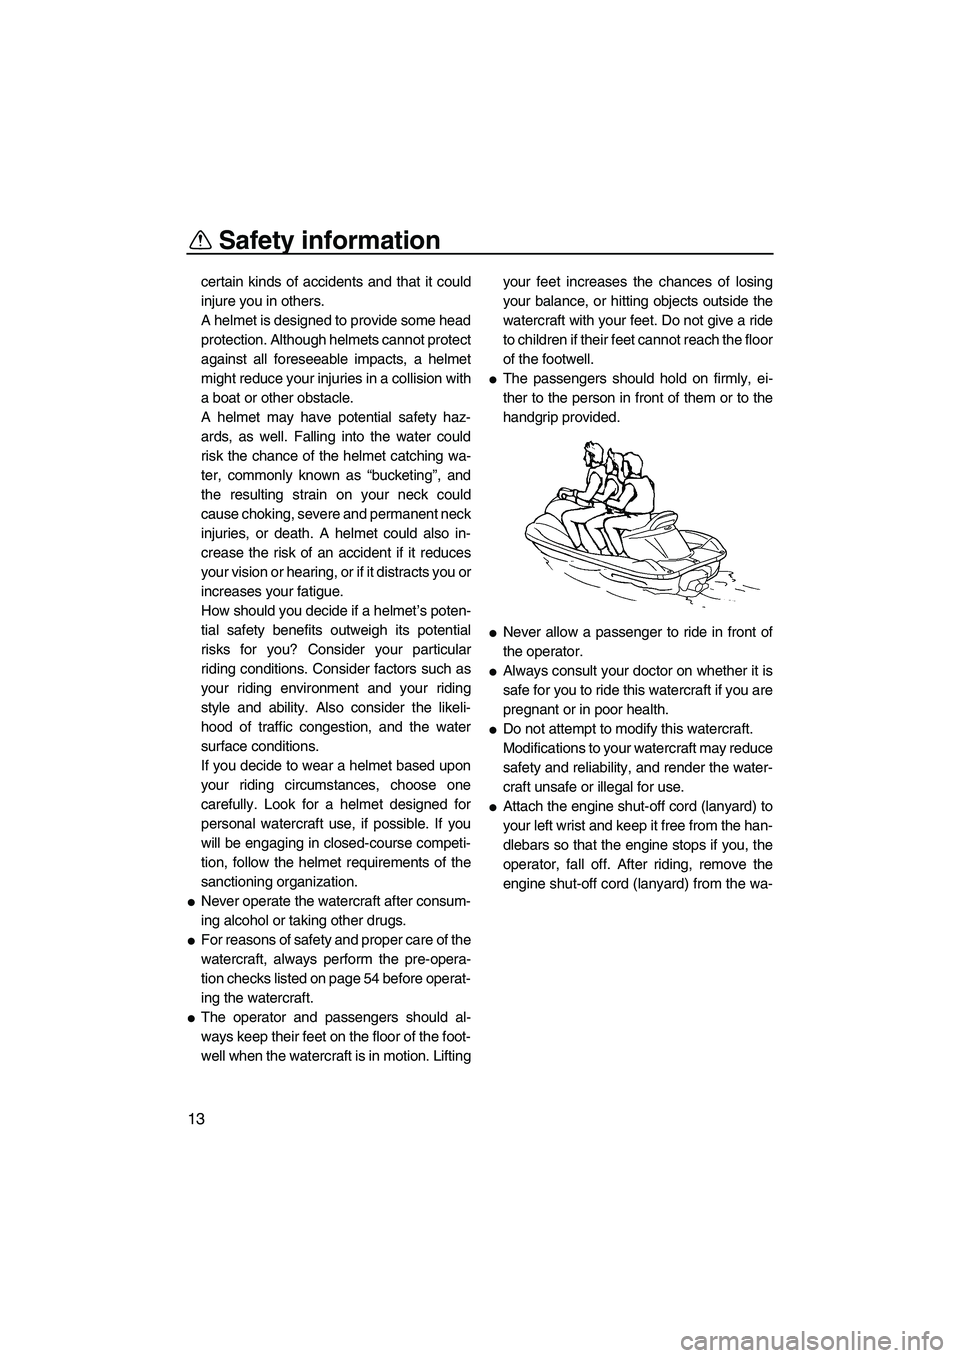 YAMAHA SVHO 2009 User Guide Safety information
13
certain kinds of accidents and that it could
injure you in others.
A helmet is designed to provide some head
protection. Although helmets cannot protect
against all foreseeable i